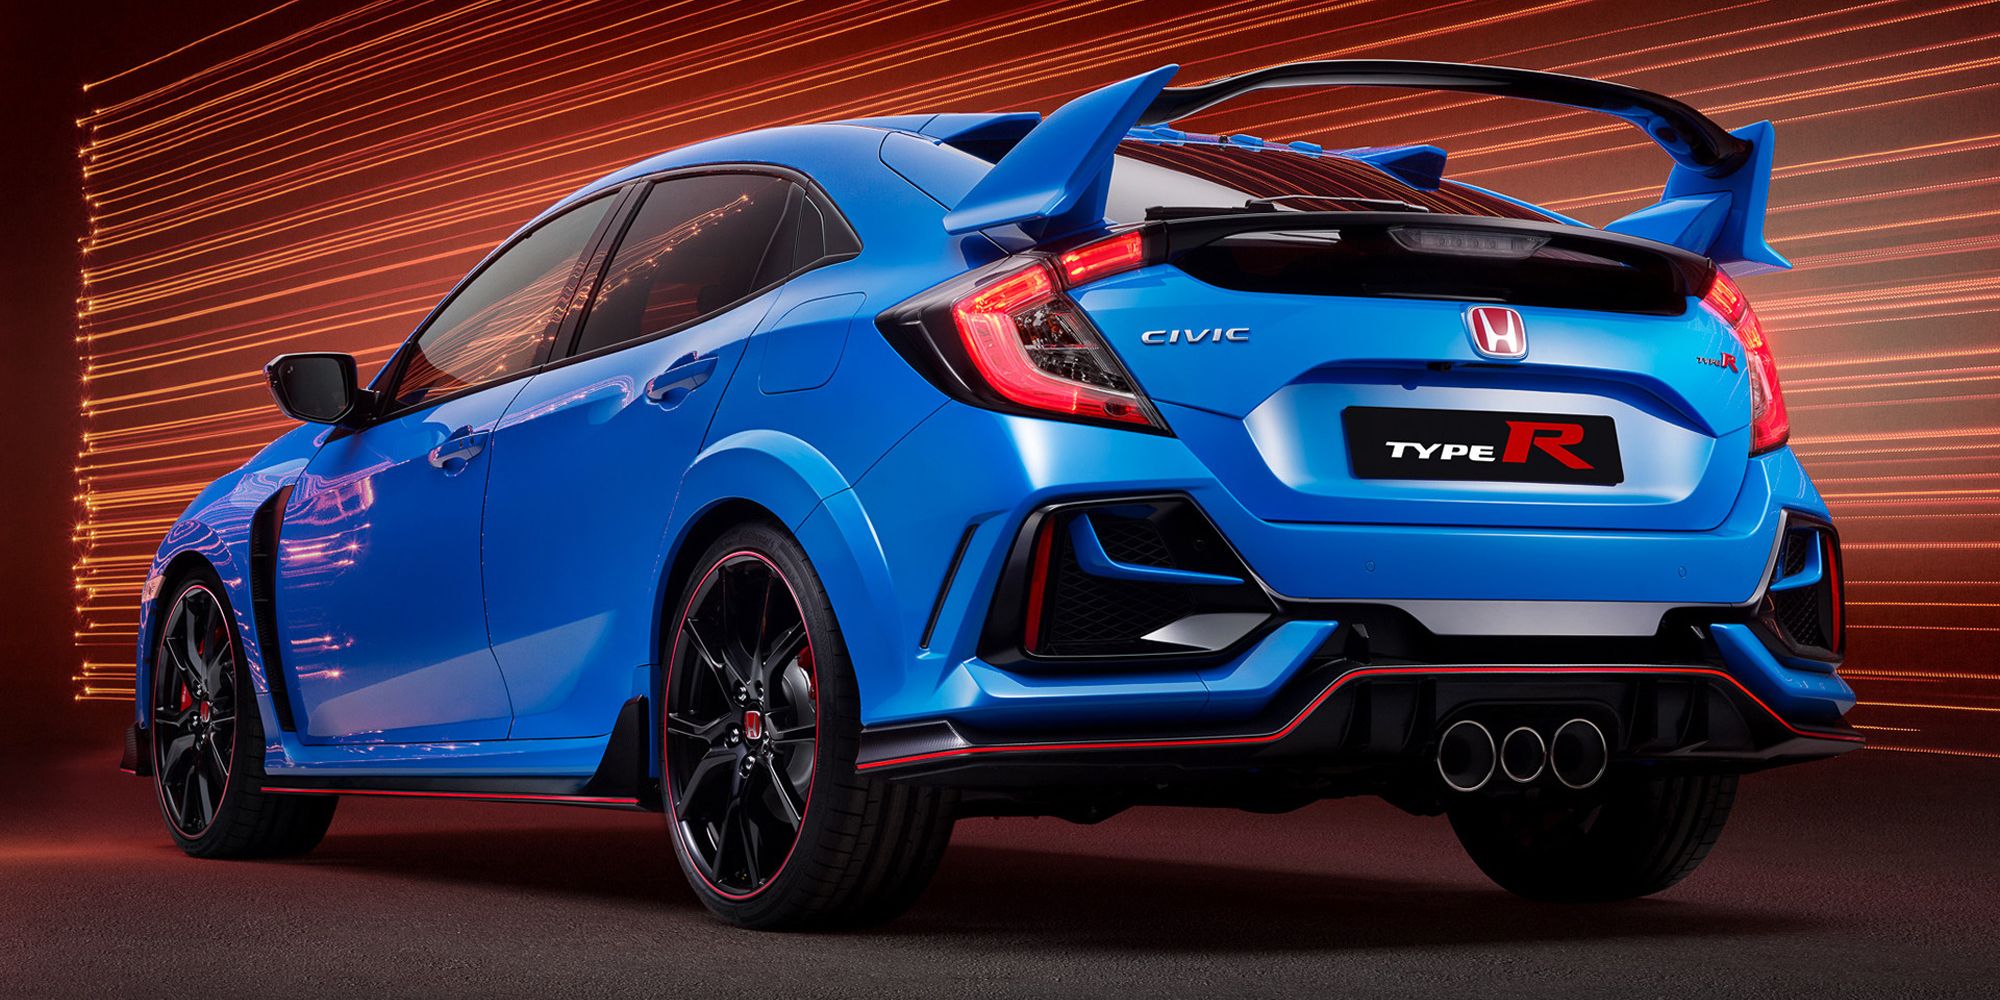 The rear of the FK8 Civic Type R